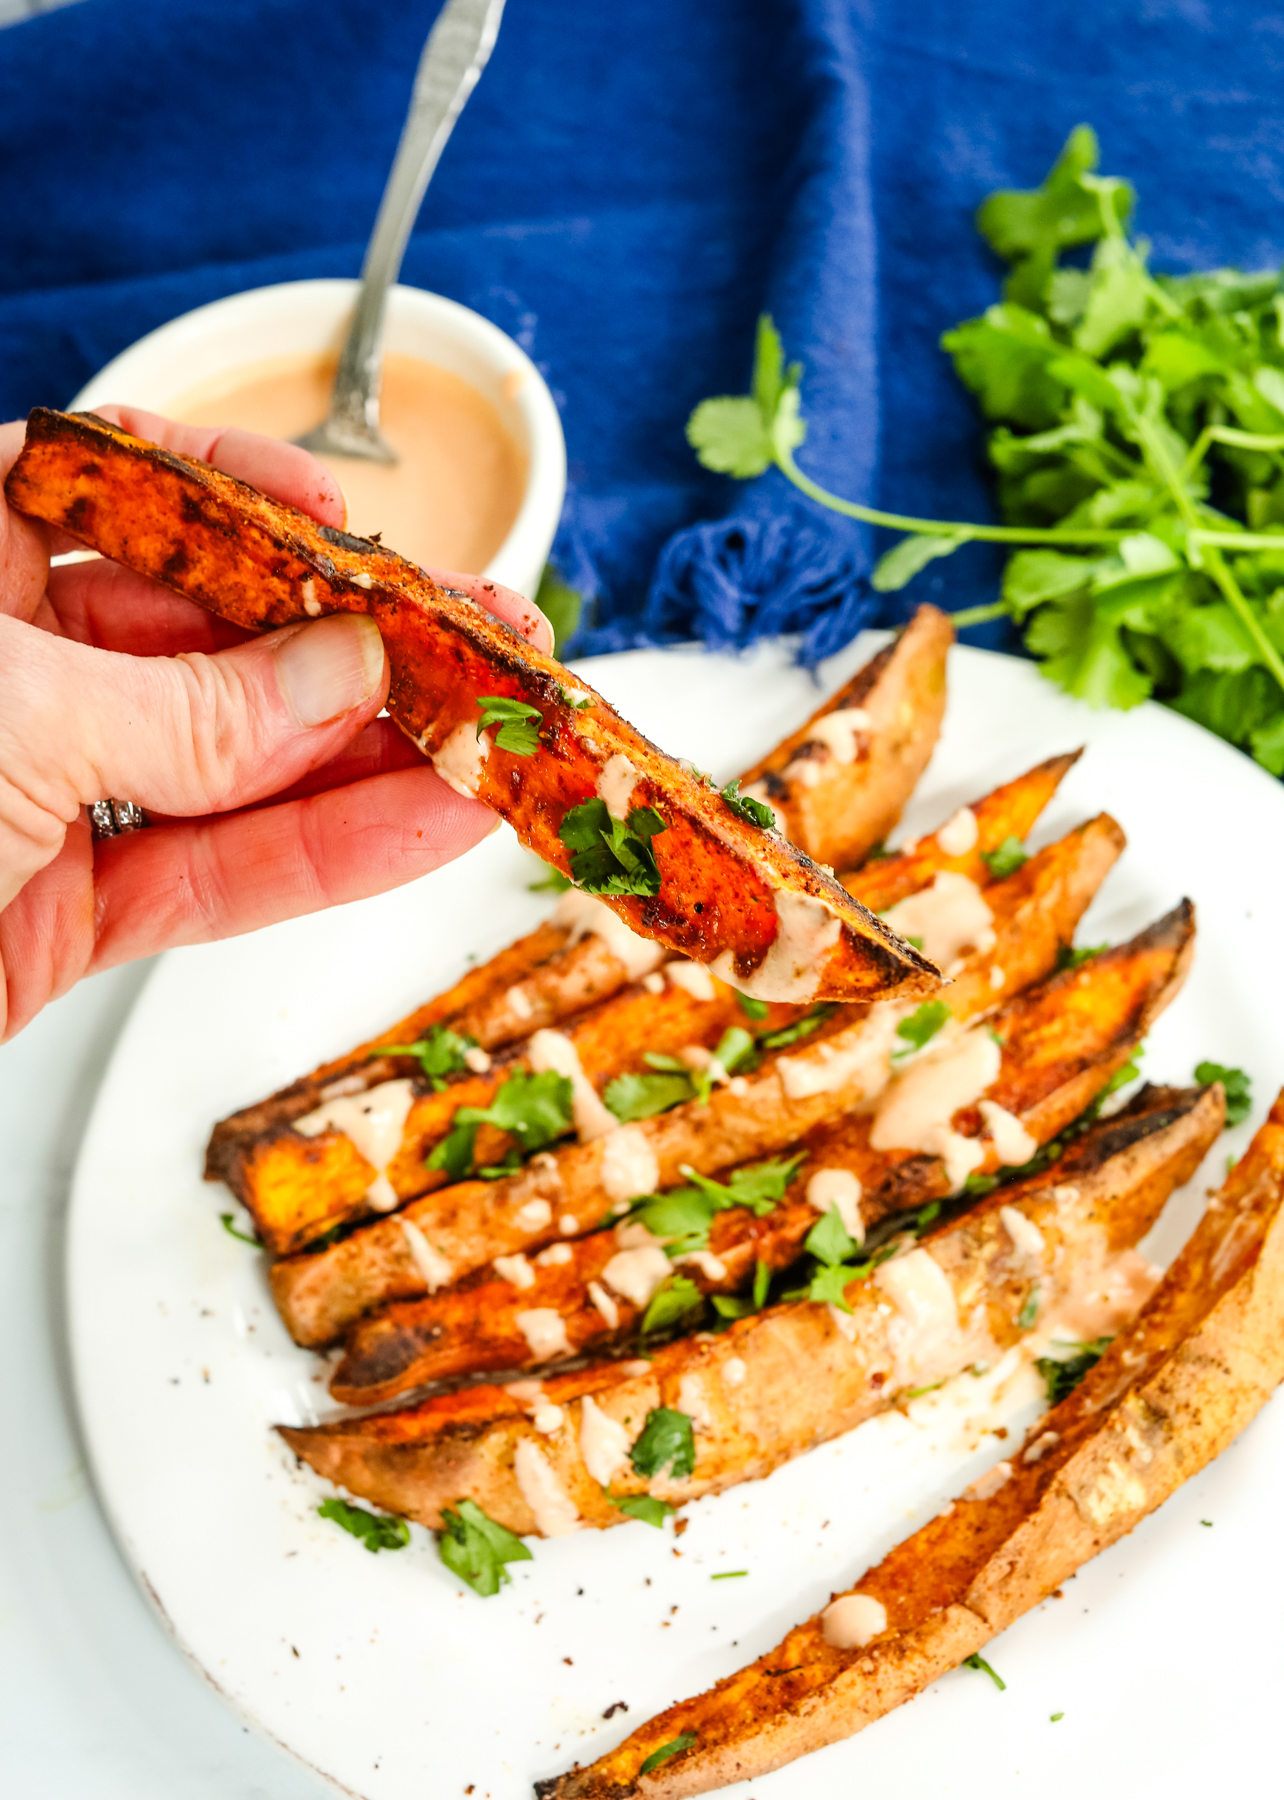 sweet potato wedges with sauce and cilantro